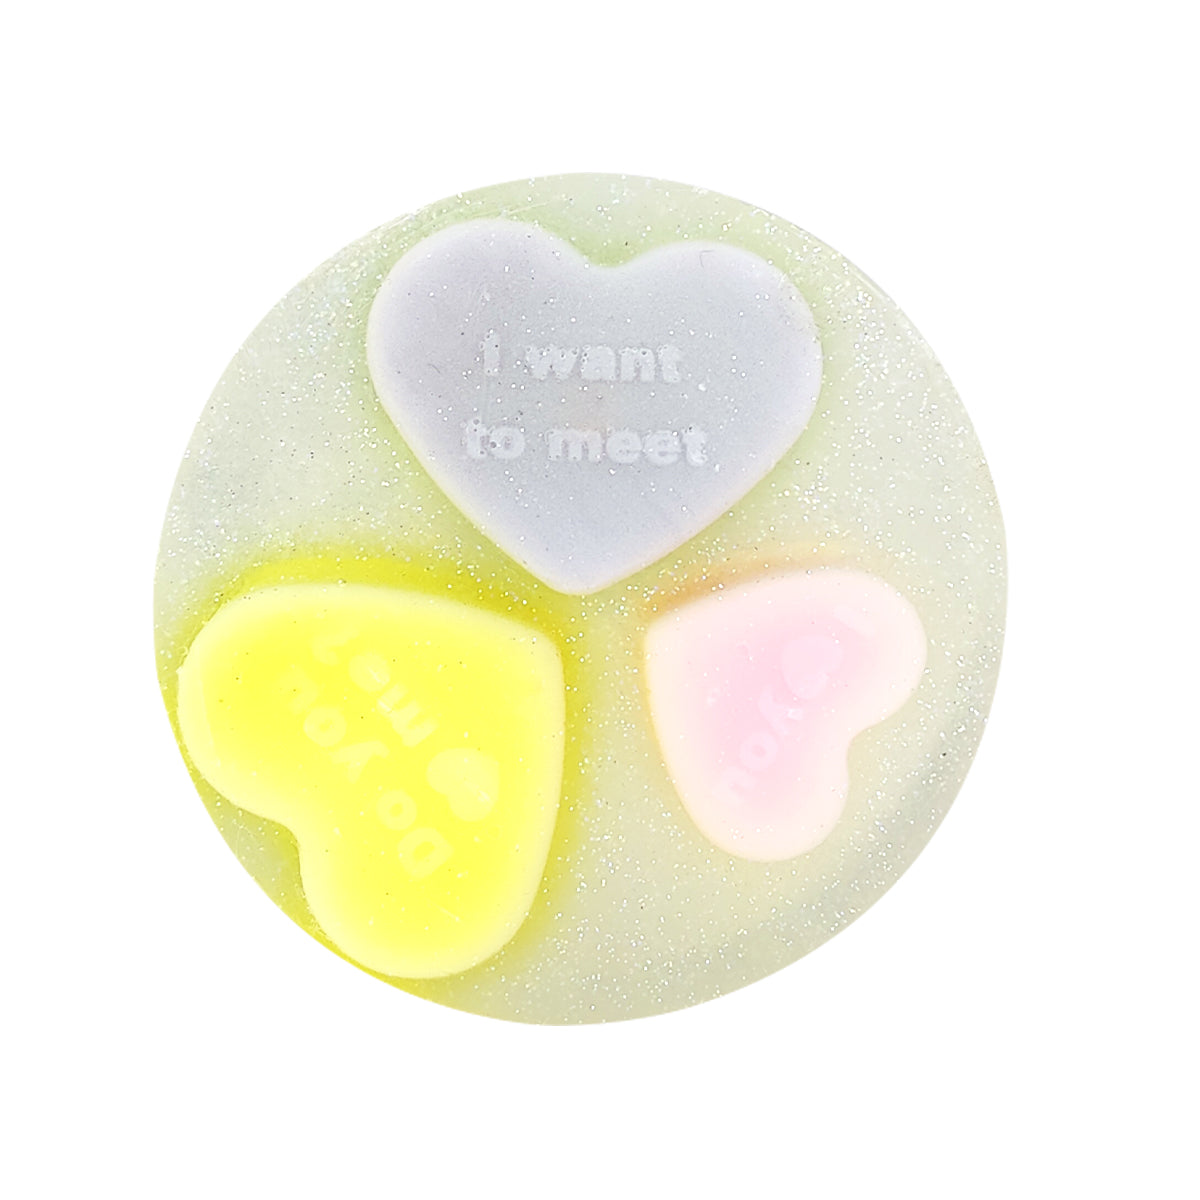 Sweet Hearts Glitter Hanmade Glycerin Soap for sale, Handmade Glycerin Soap with Heart Charms, Valentines day gifts, Mothers day gift ideas